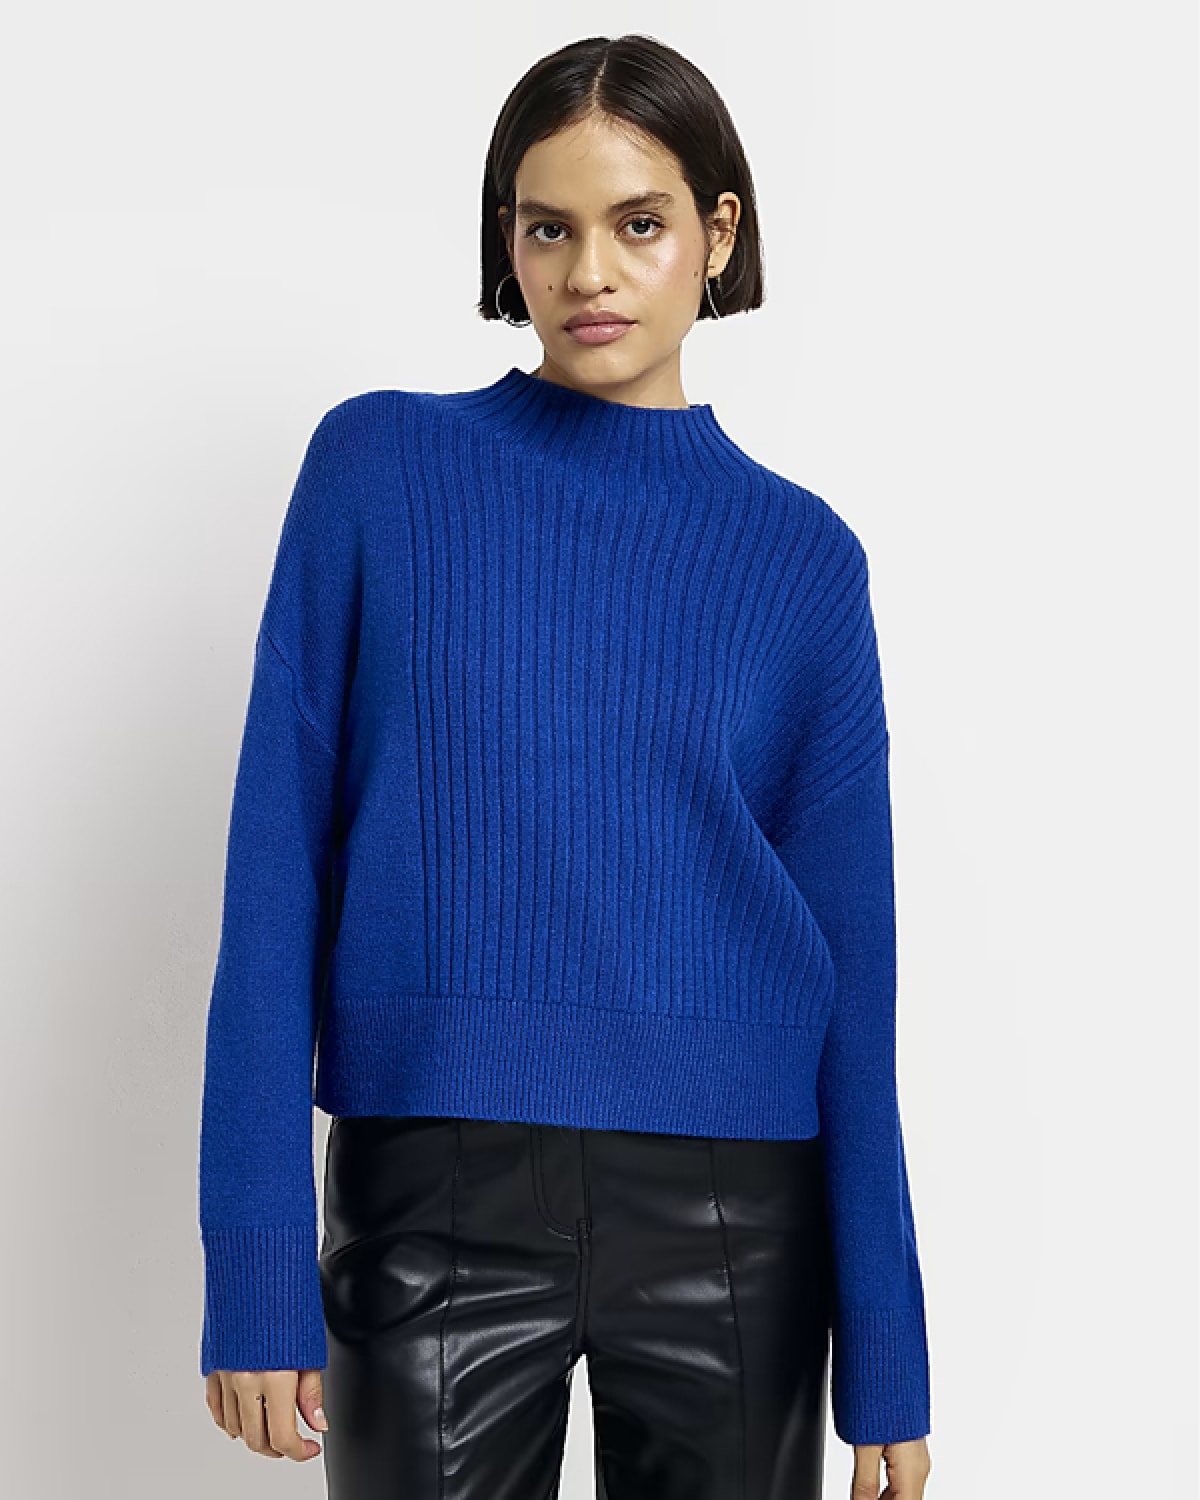 Hit Knits For Winter '22 | River Island Edit